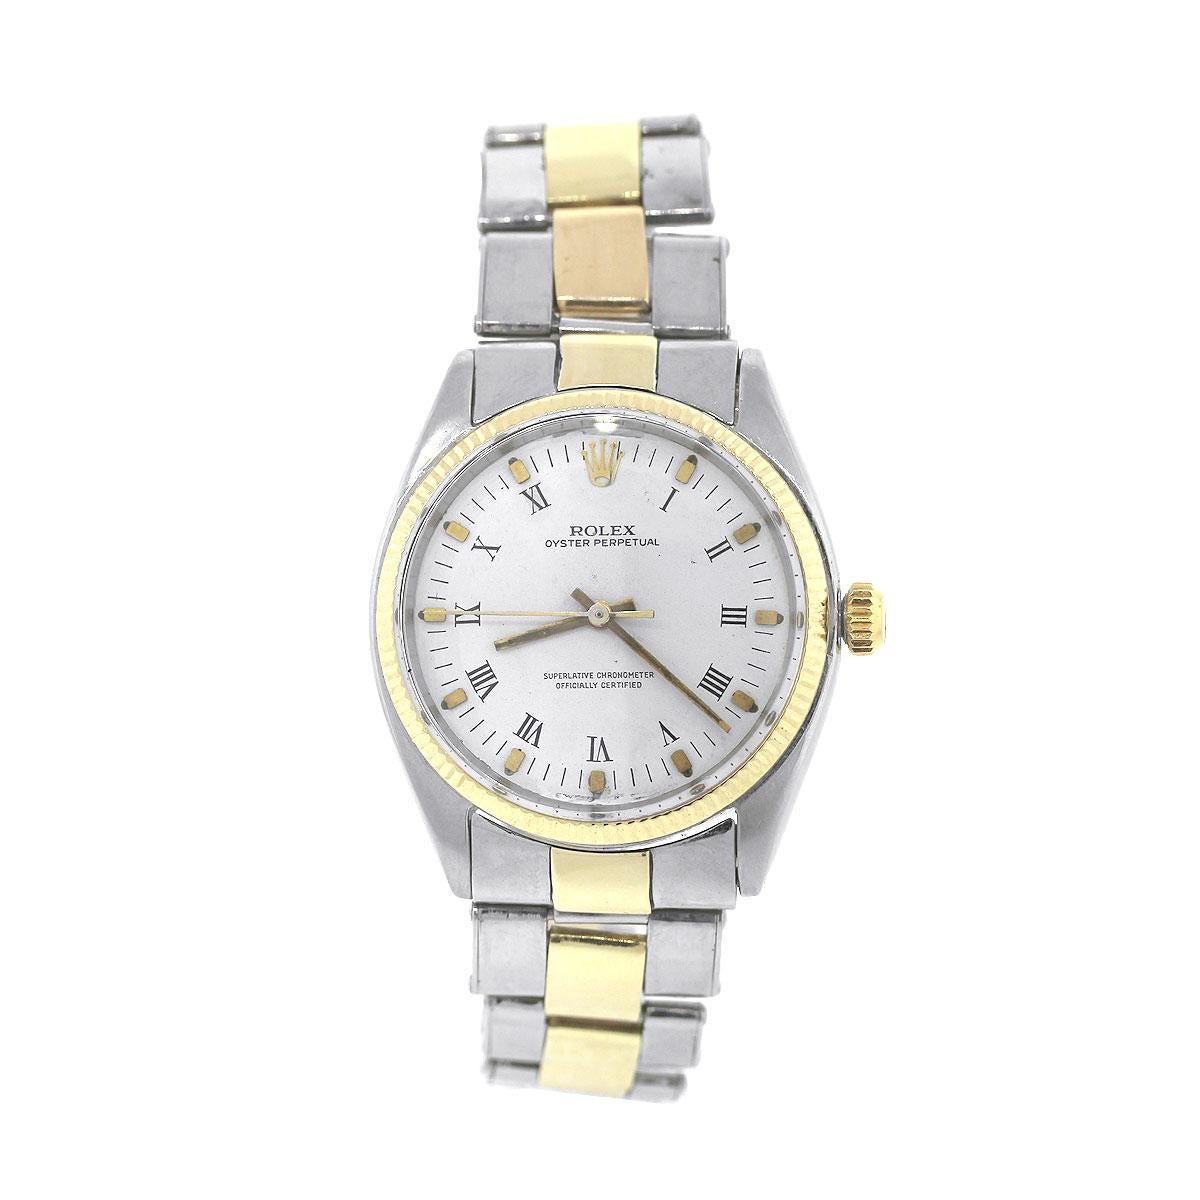 Brand: Rolex
MPN: 1005
Model: Oyster Perpetual
Case Material: Stainless Steel
Case Diameter: 36mm
Crystal: Plastic
Bezel: Fluted 18k Yellow Gold
Dial: White dial with gold hands, markers and roman numerals
Bracelet: Two tone oyster bracelet
Size: